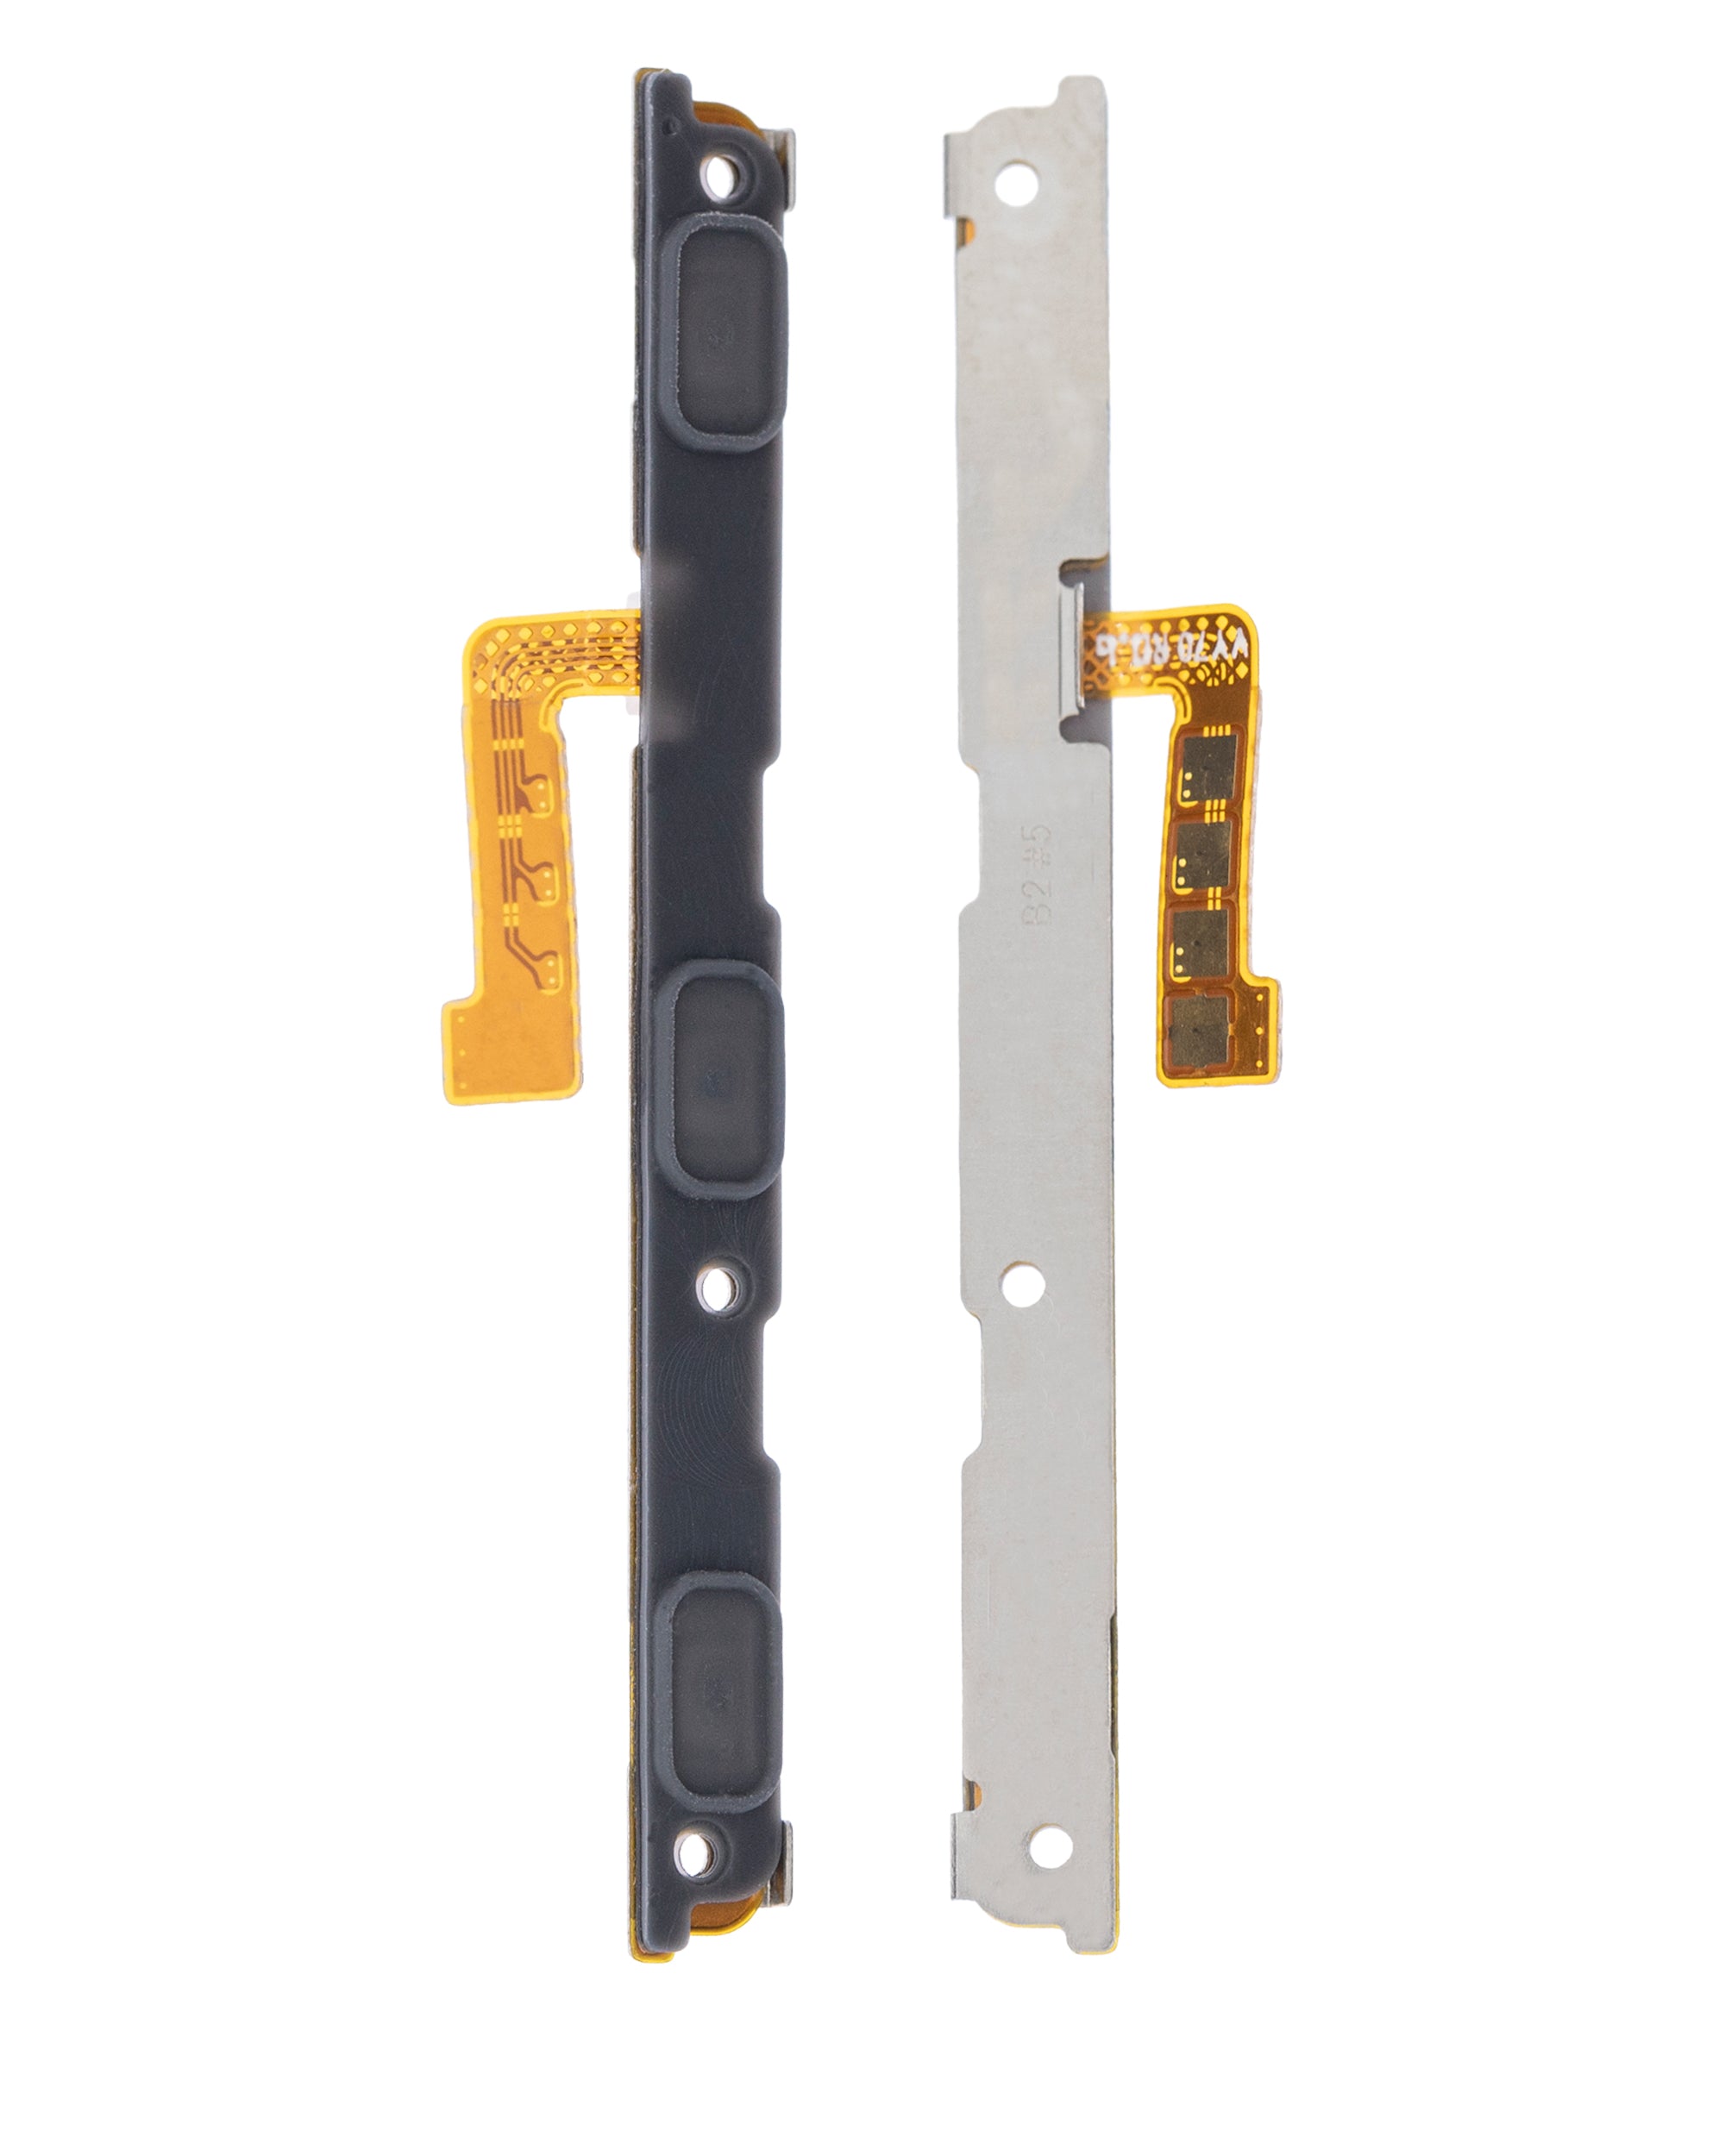 For Samsung Galaxy S10 / S10 Plus Volume Button Flex Cable Replacement